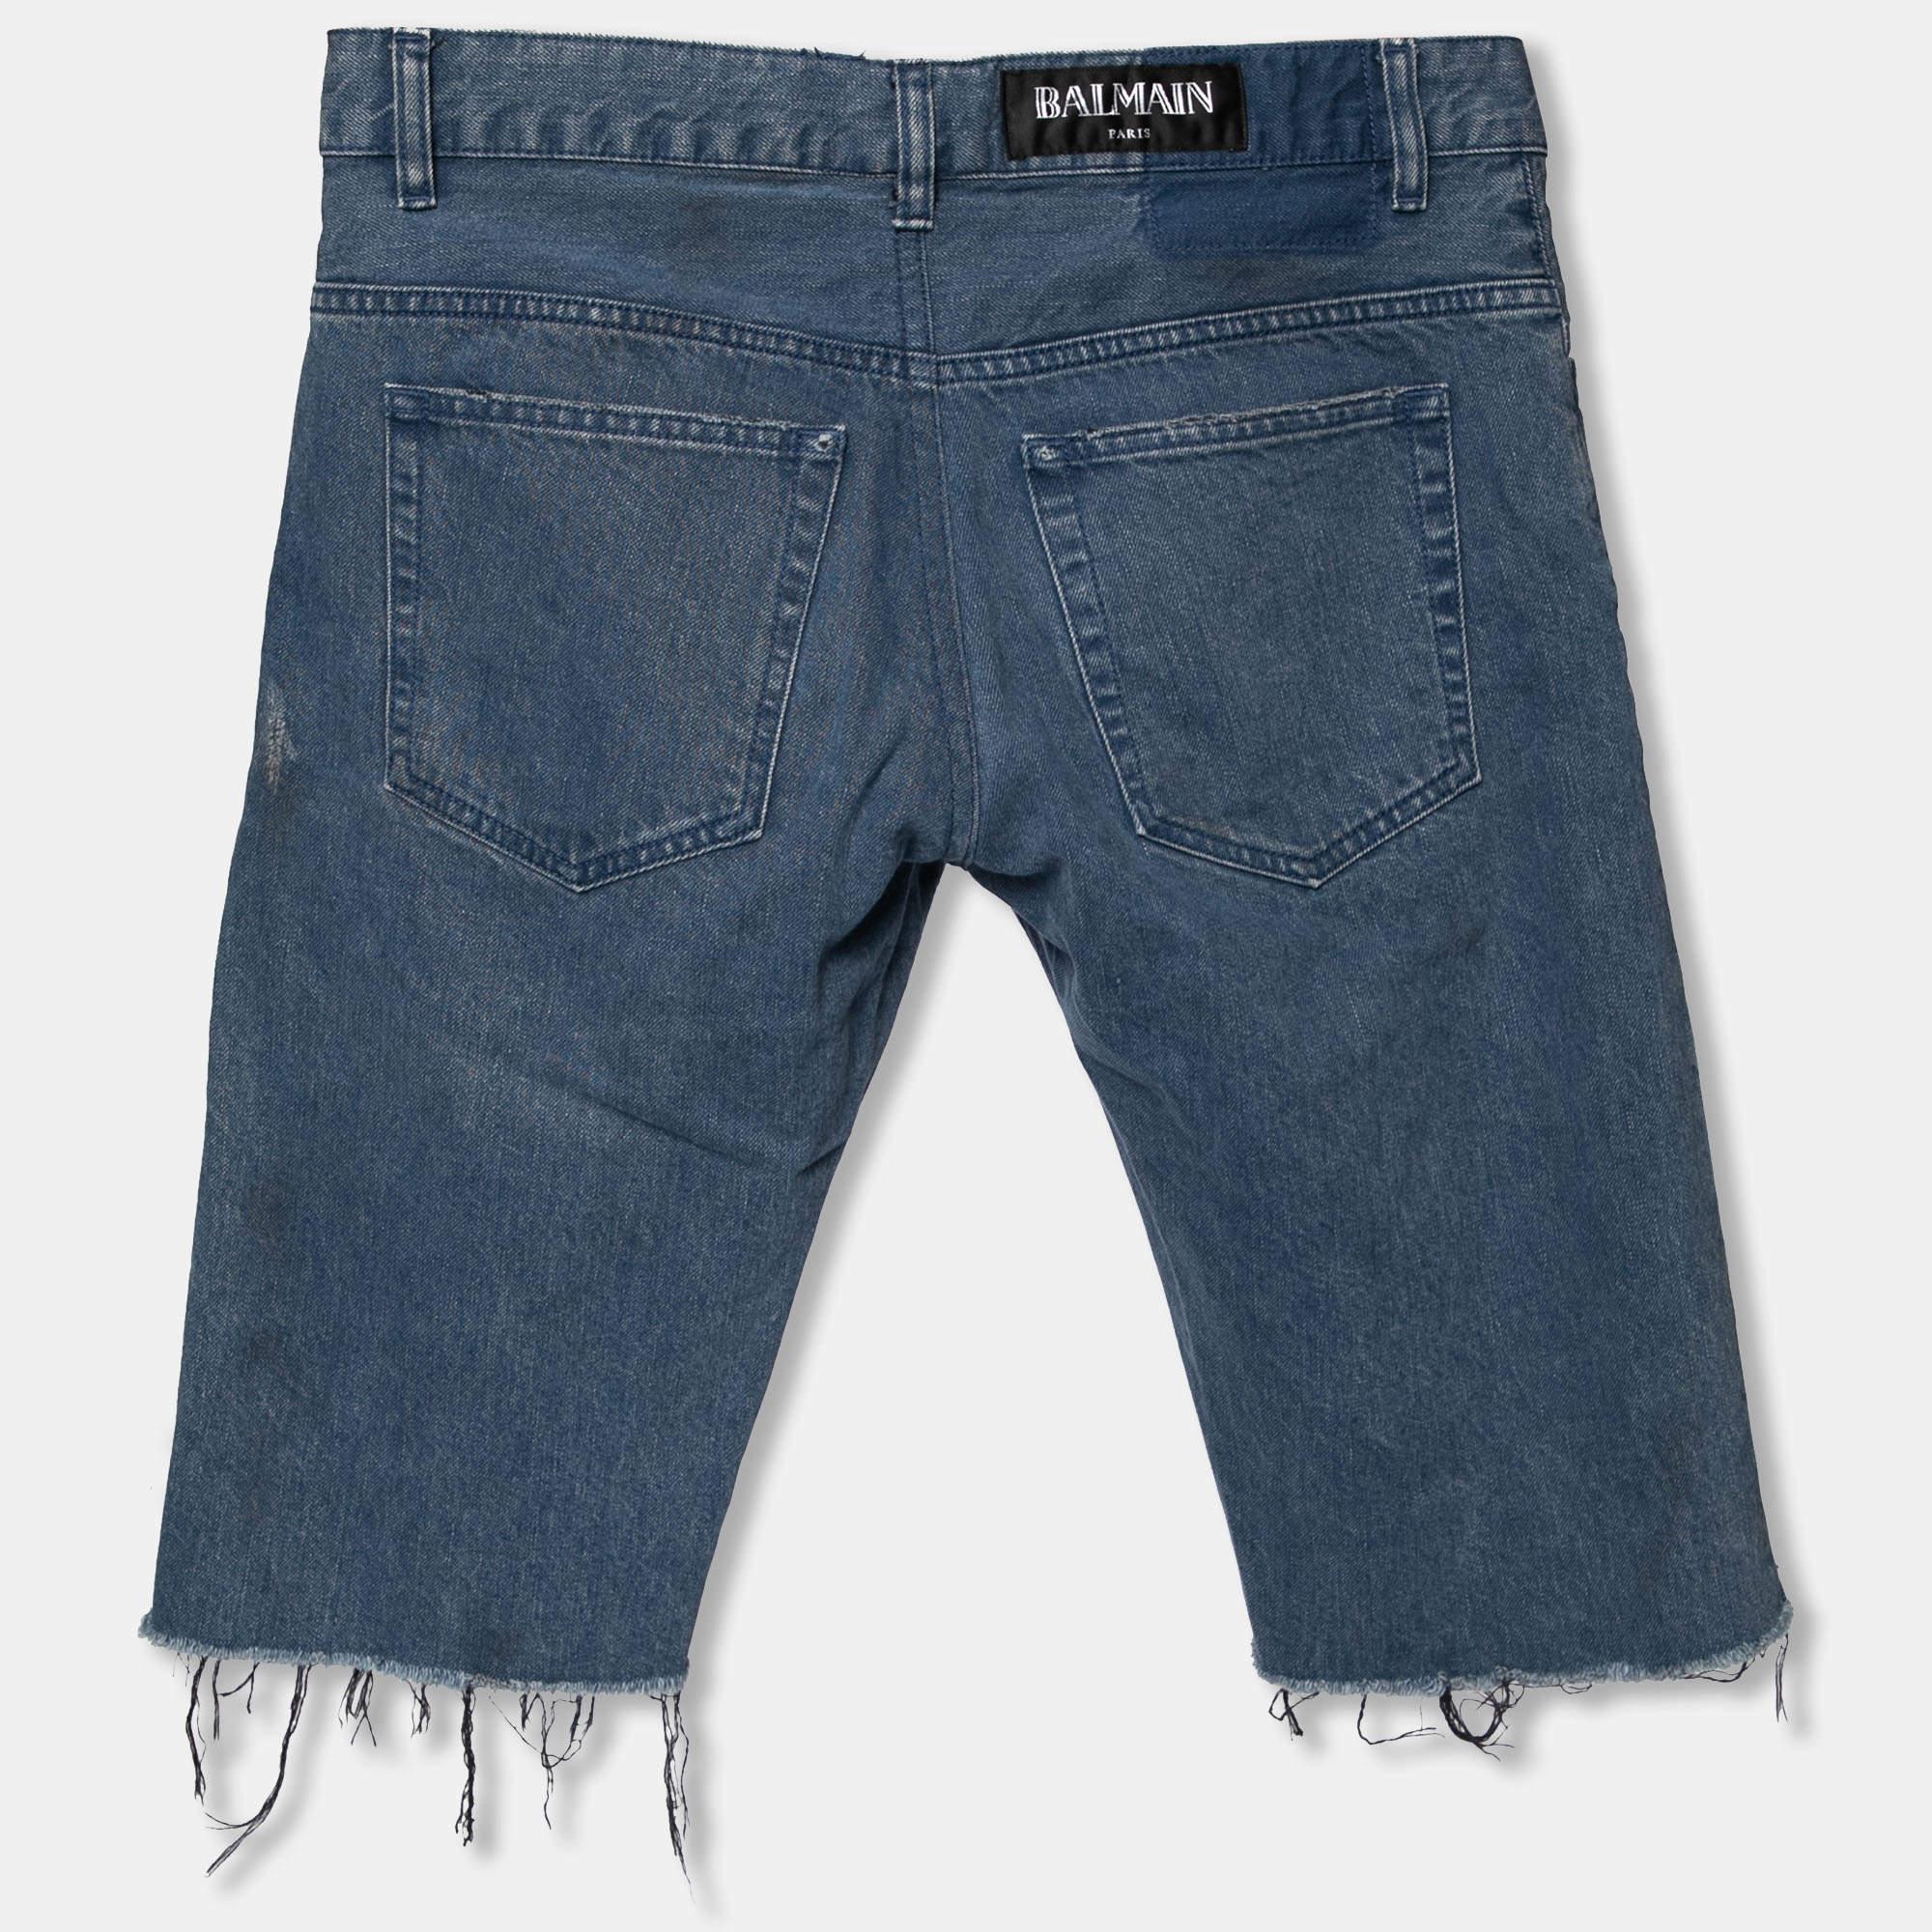 An edgy pair of shorts to add to your wardrobe is this blue one from Balmain. Made from comfortable cotton, these shorts feature a distressed design, frayed edges on the hems, a buttoned closure, and external pockets.

